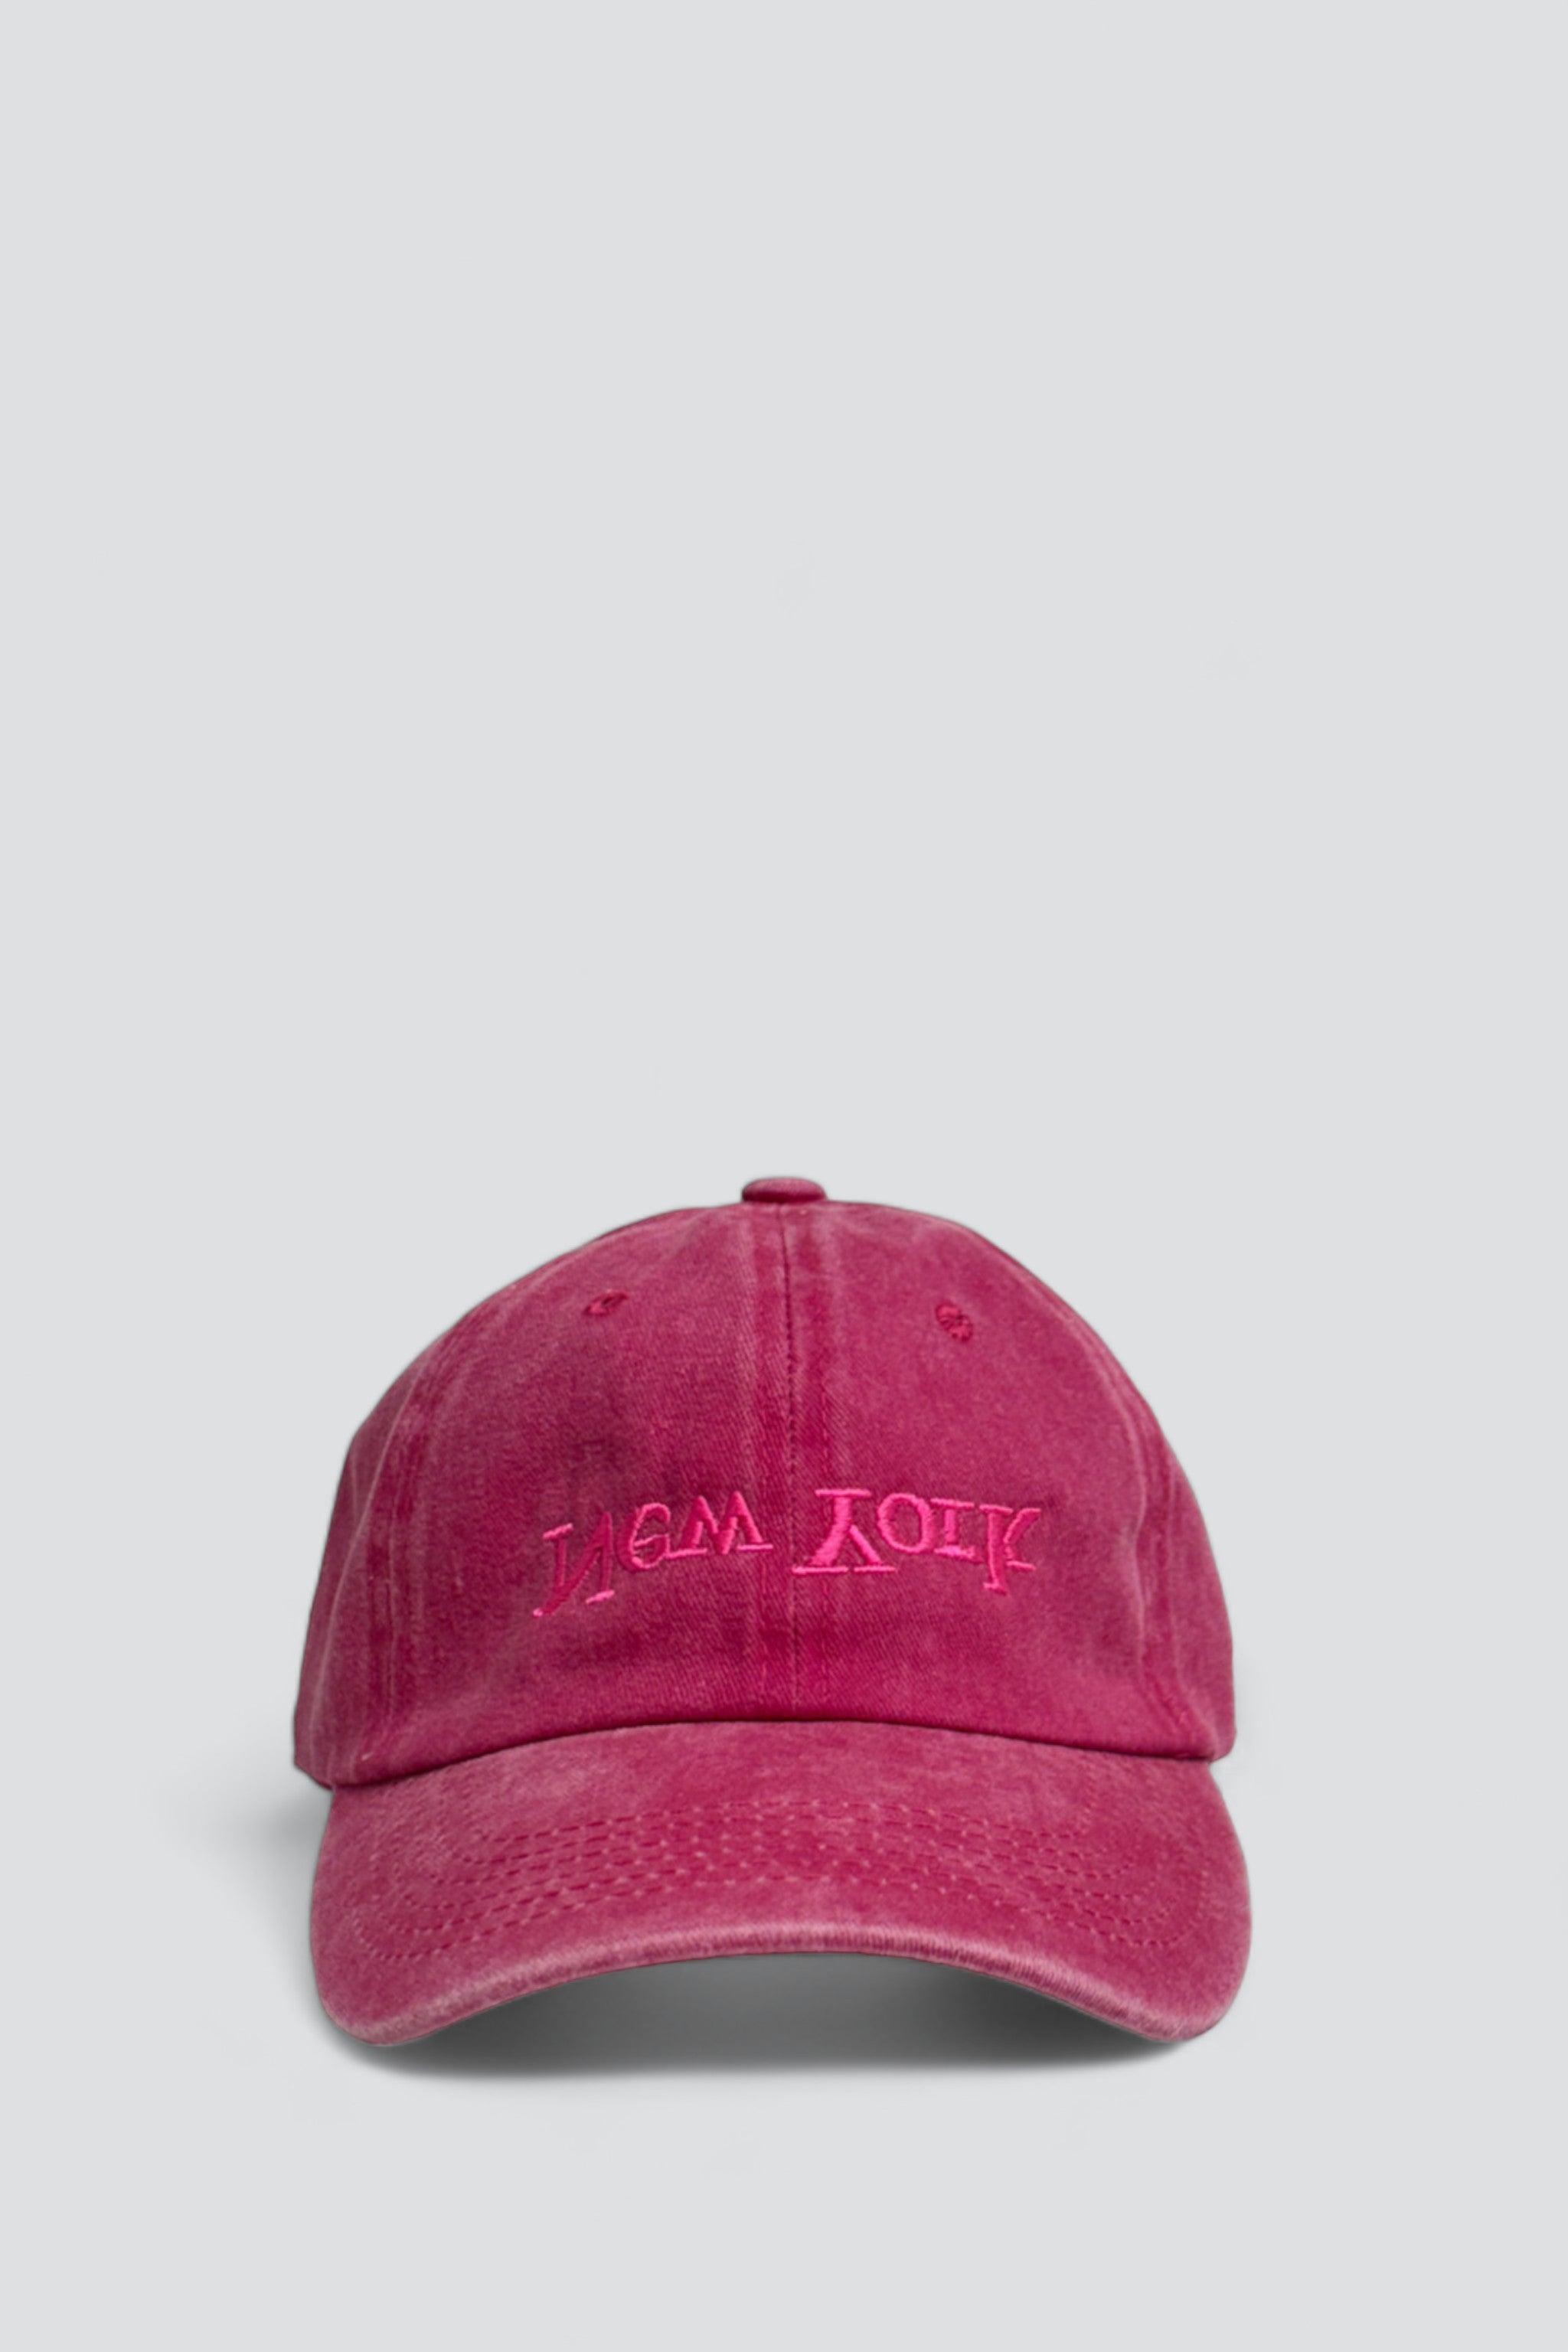 New York Embroidered Hat - Washed Pink